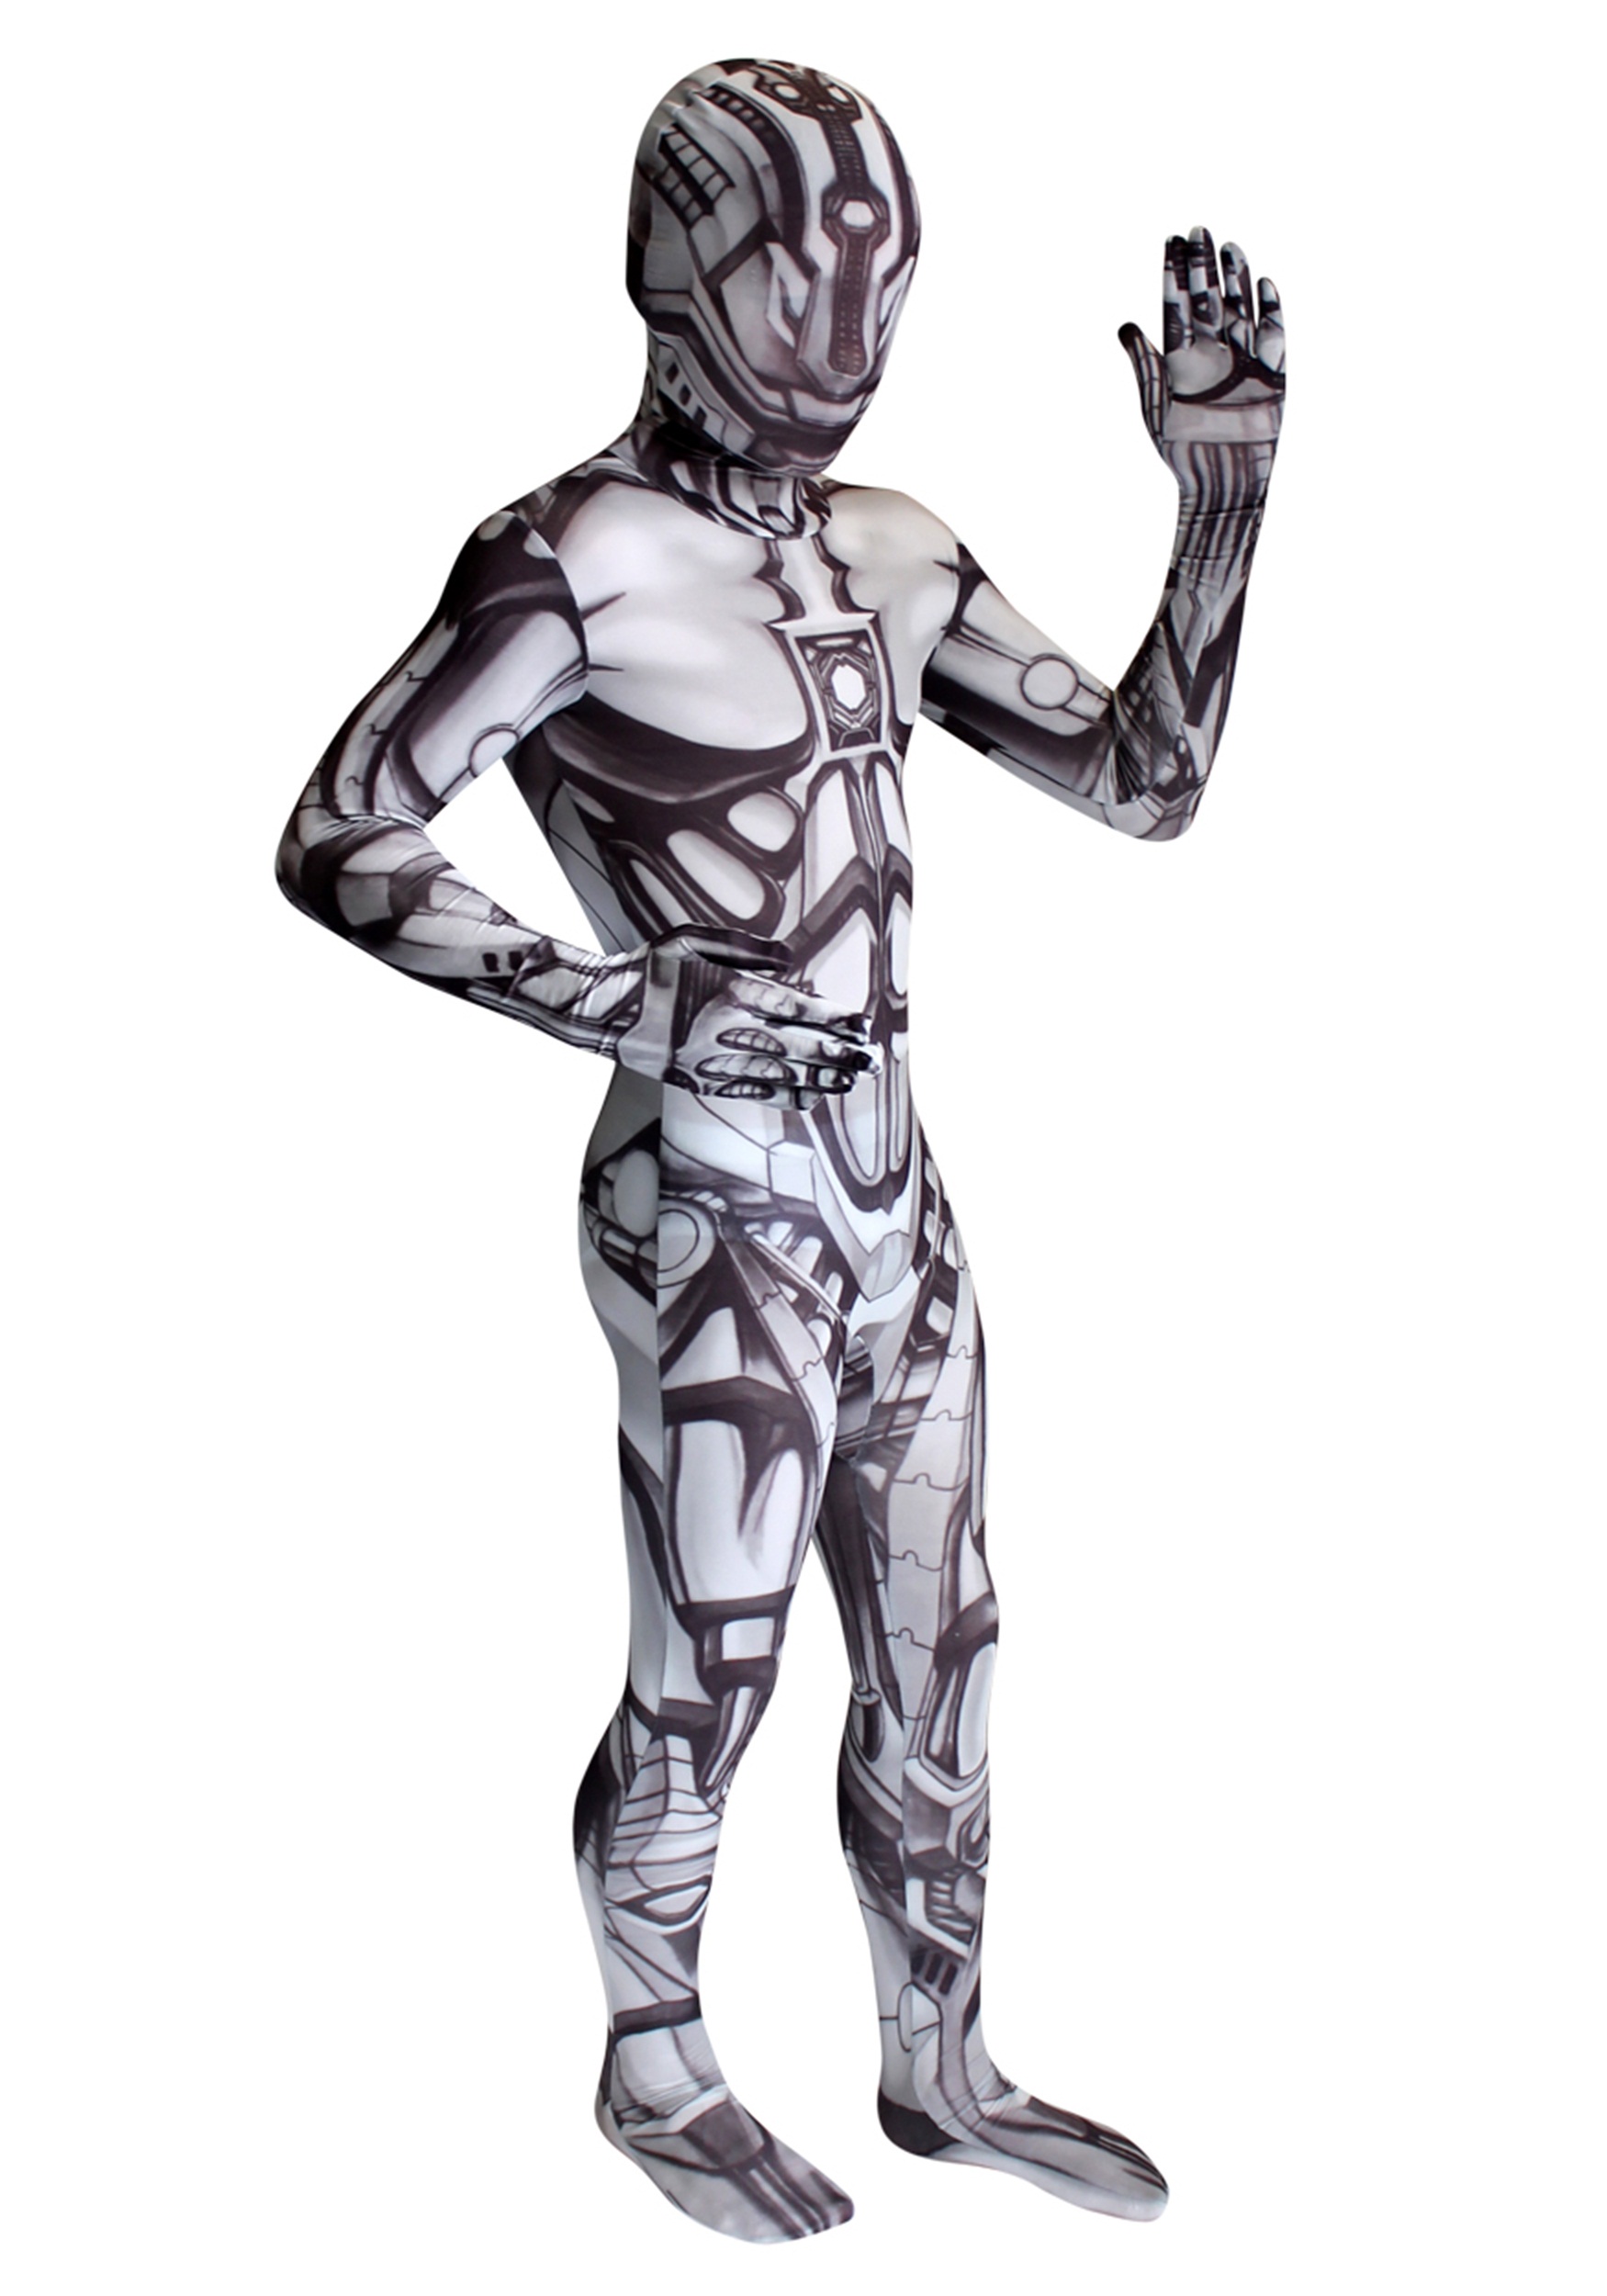 The Android Morphsuit